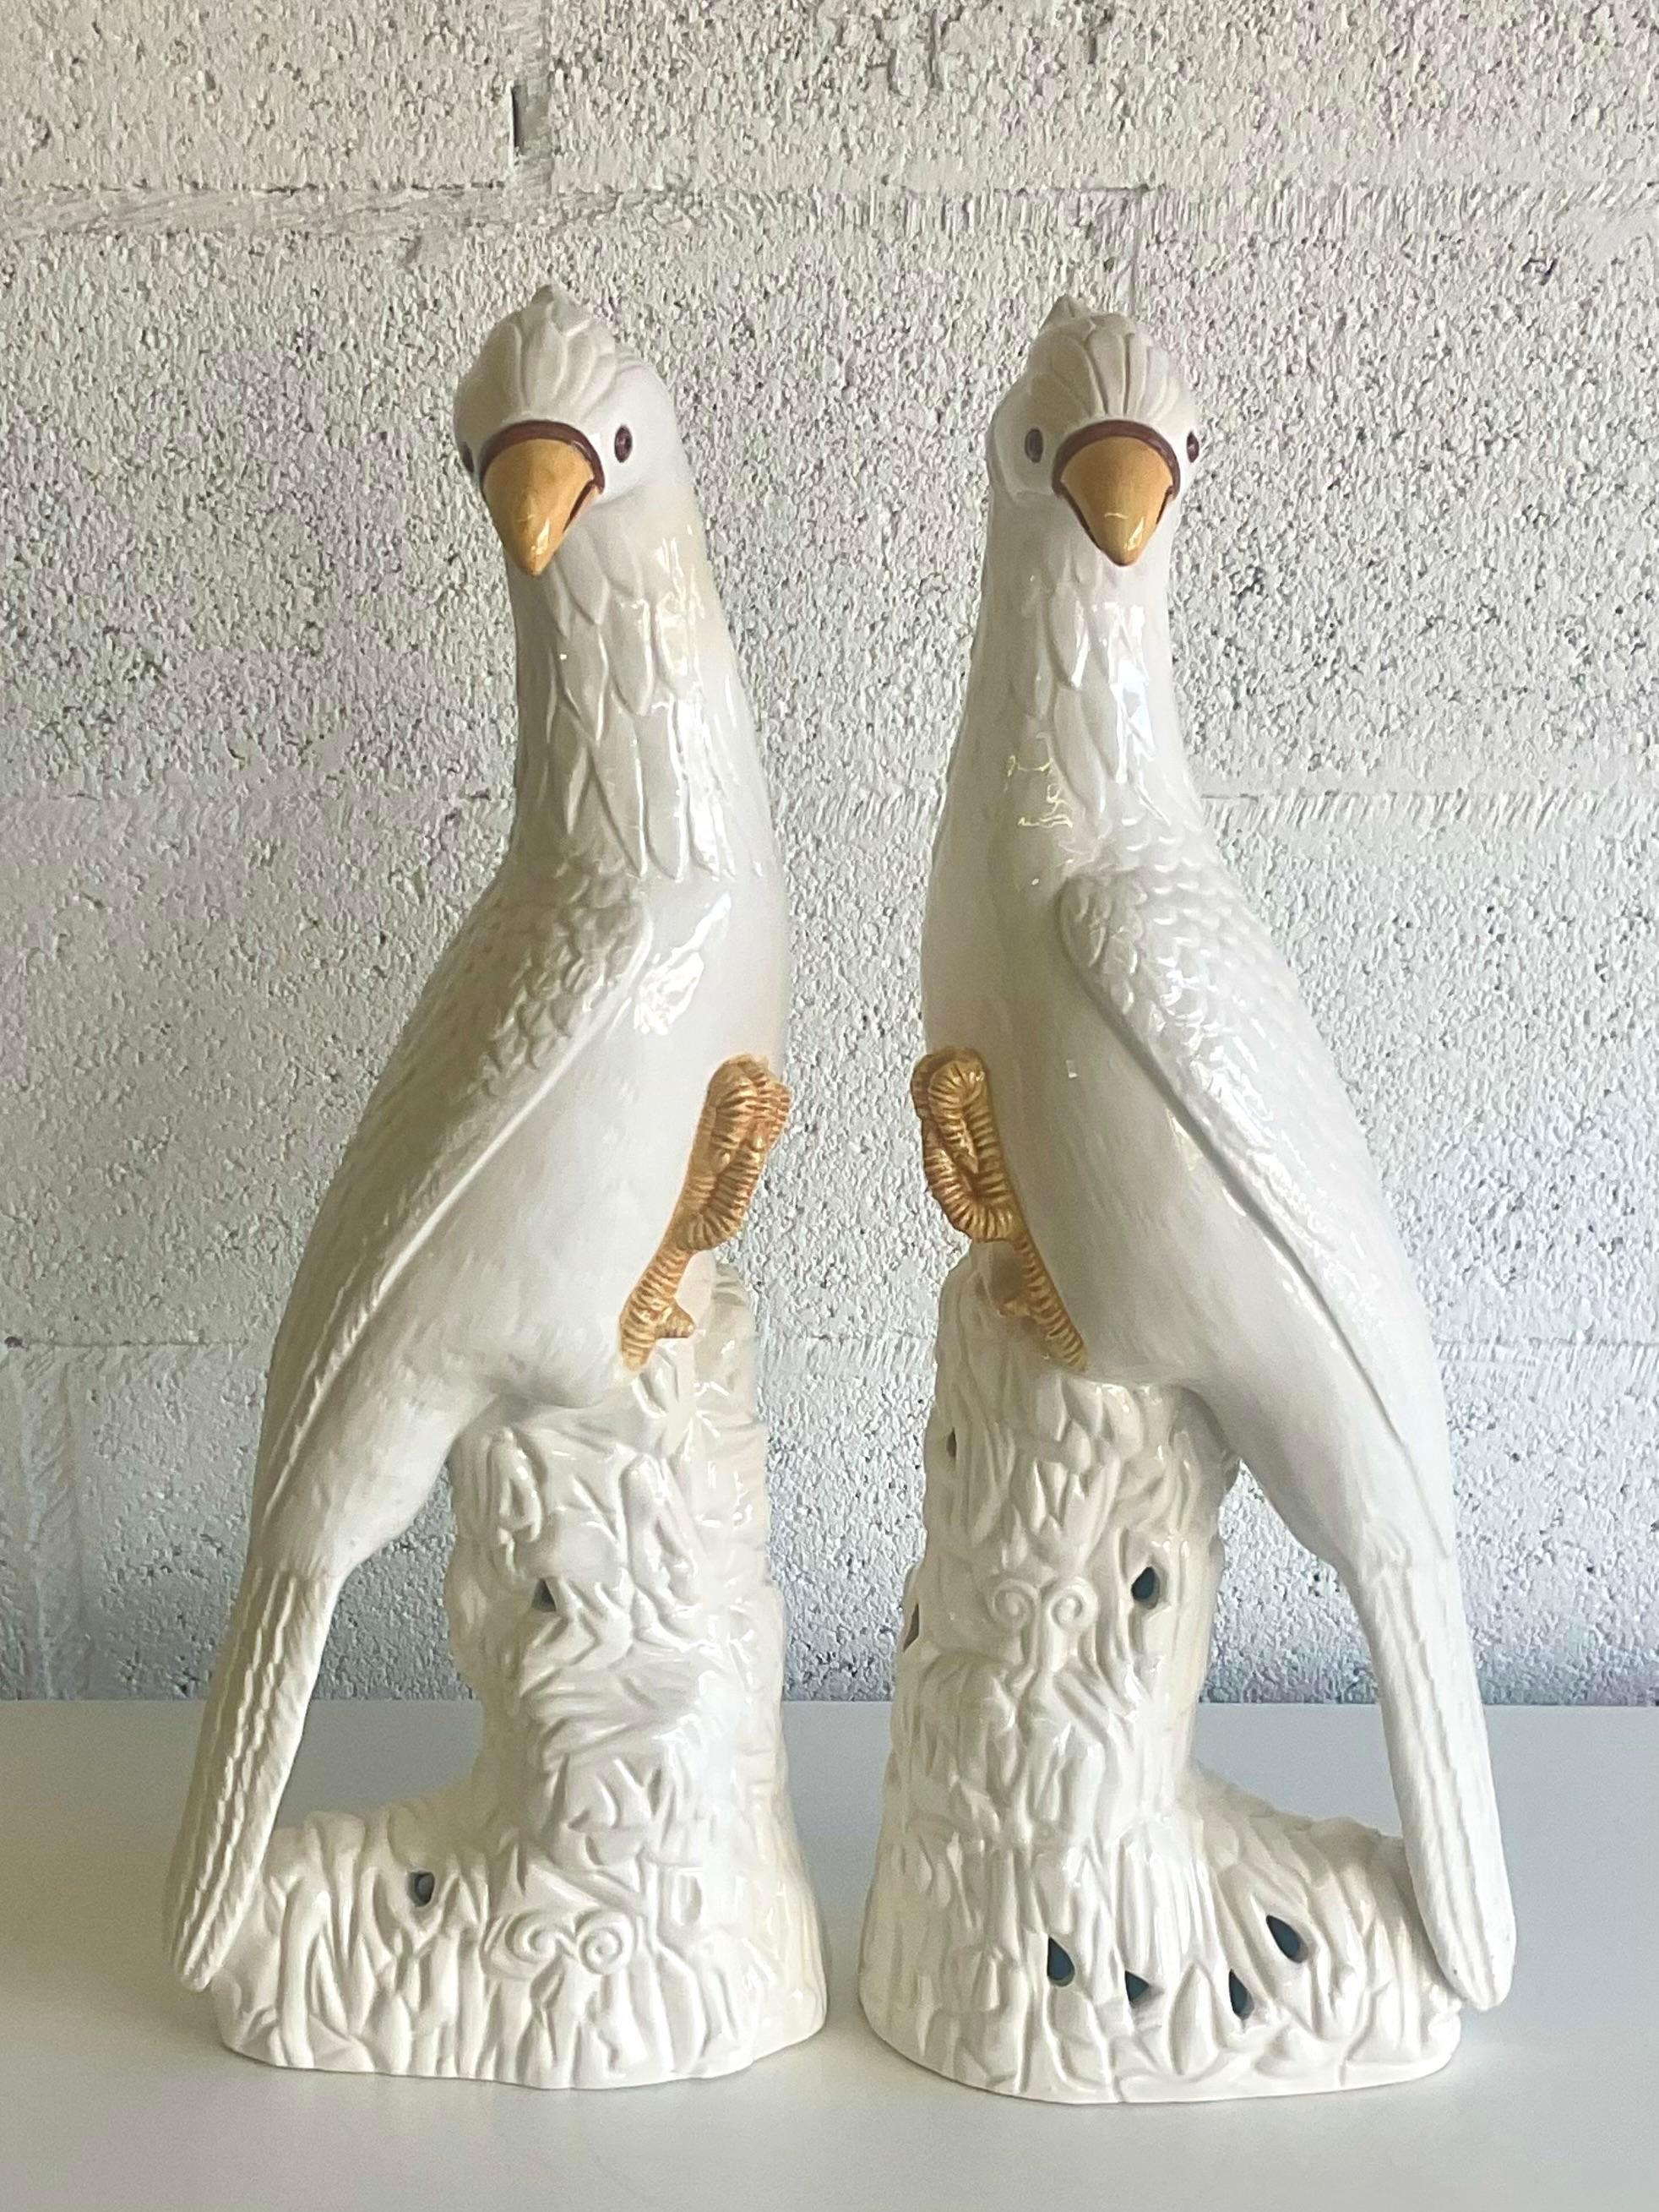 A fantastic pair of vintage cockatoo. Made in Italy. Beautiful glazed ceramic birds in regal poses. Marked on the bottom. Acquired from a Palm Beach estate. 